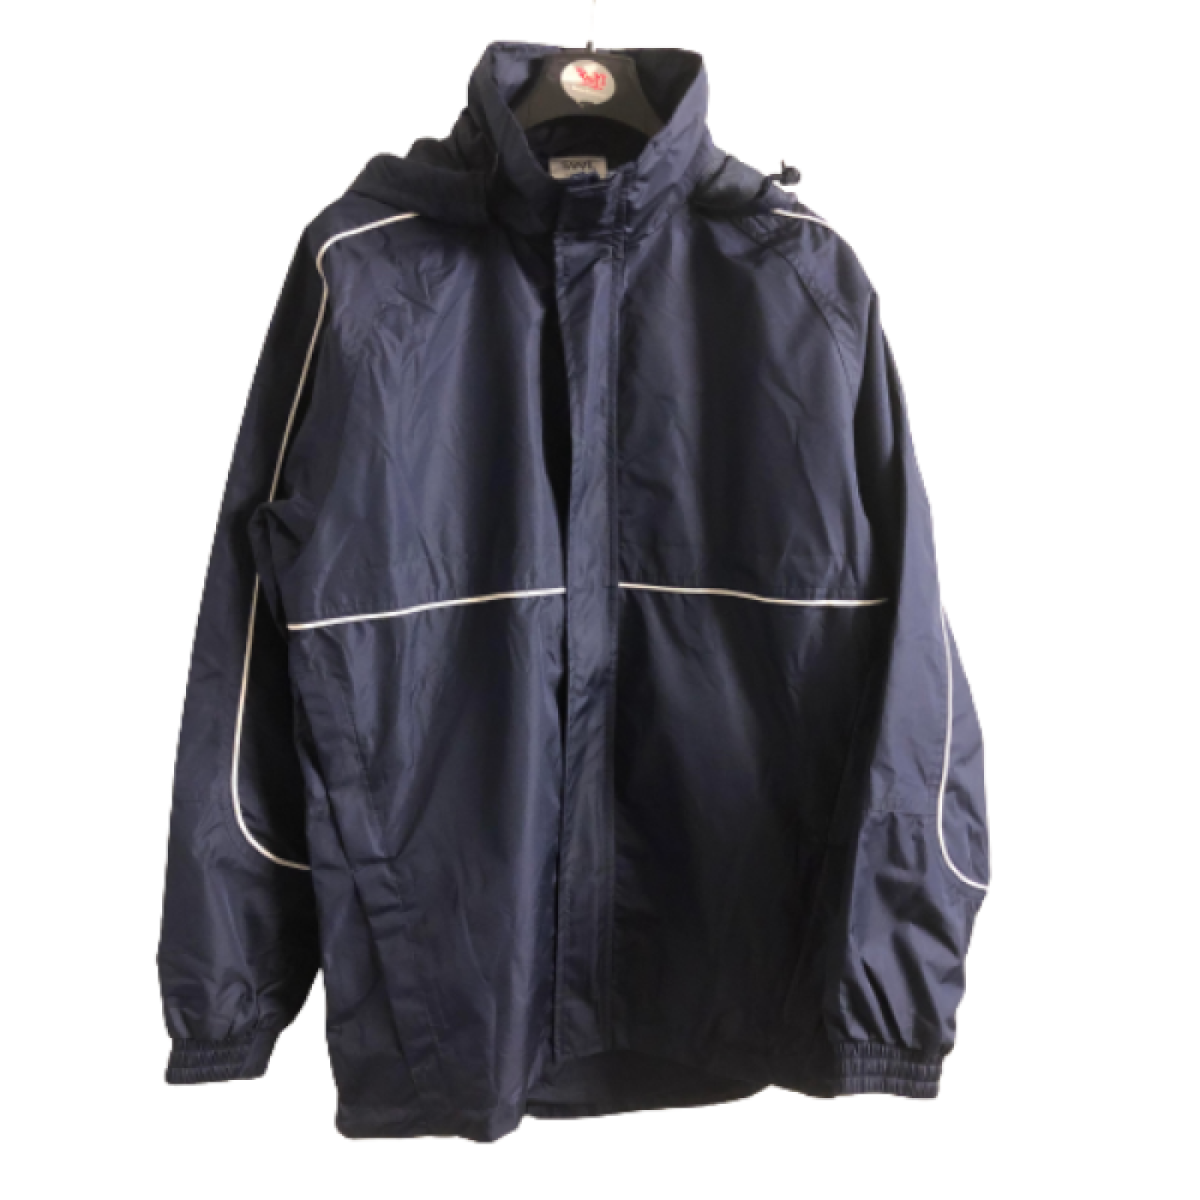 Navy Amazon Rain Jacket - Forsters School Outfitters (Sittingbourne)